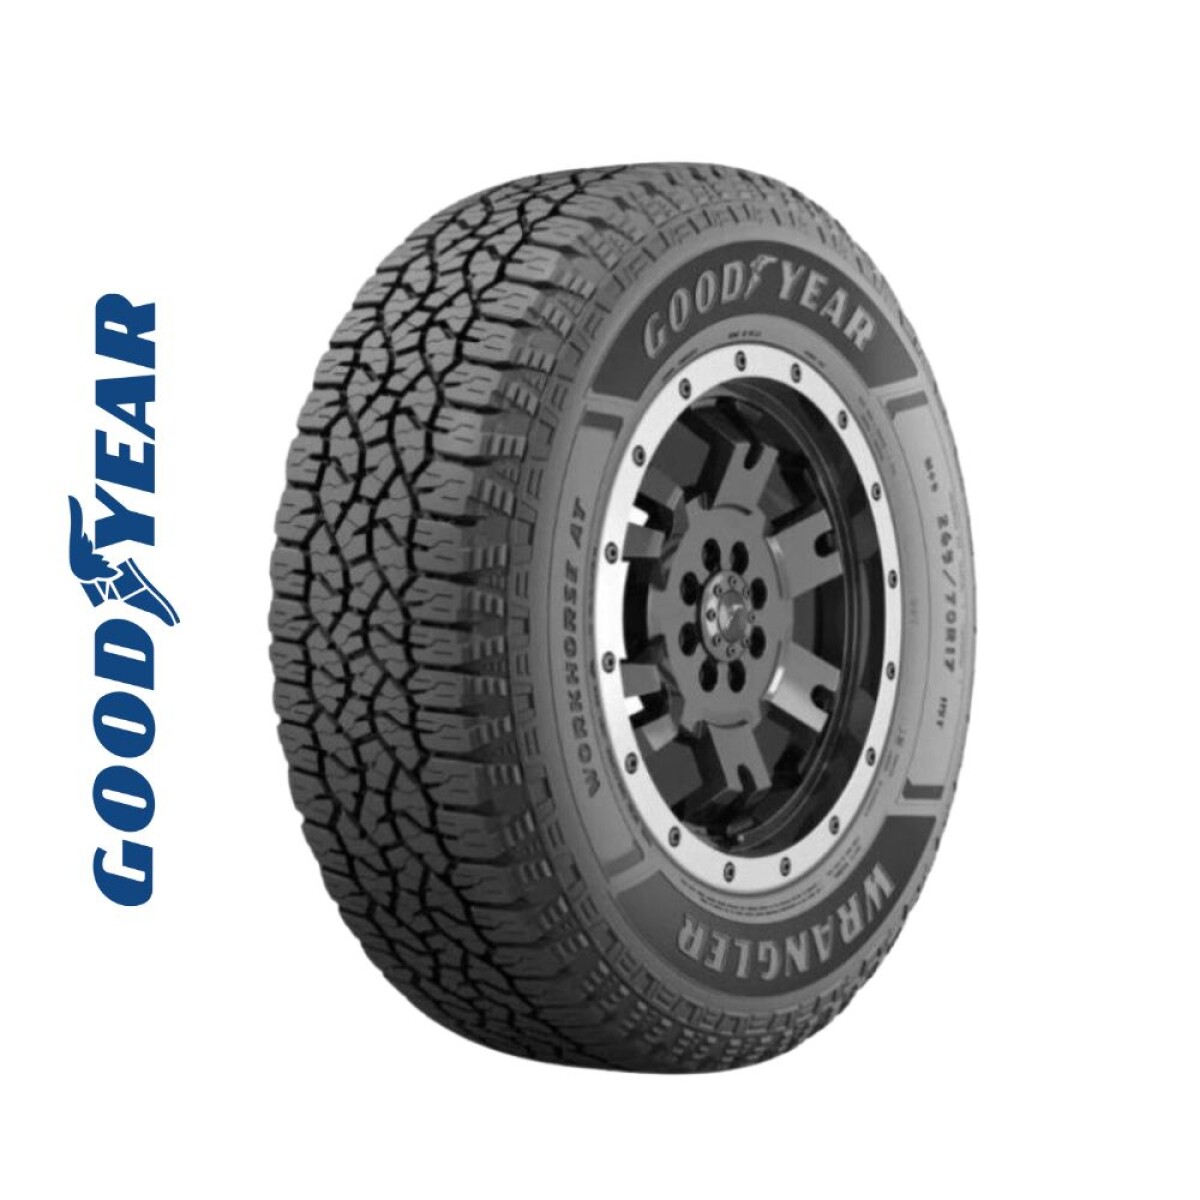 245/70 R16 WRANGLER WORKHORSE AT 112/110T 